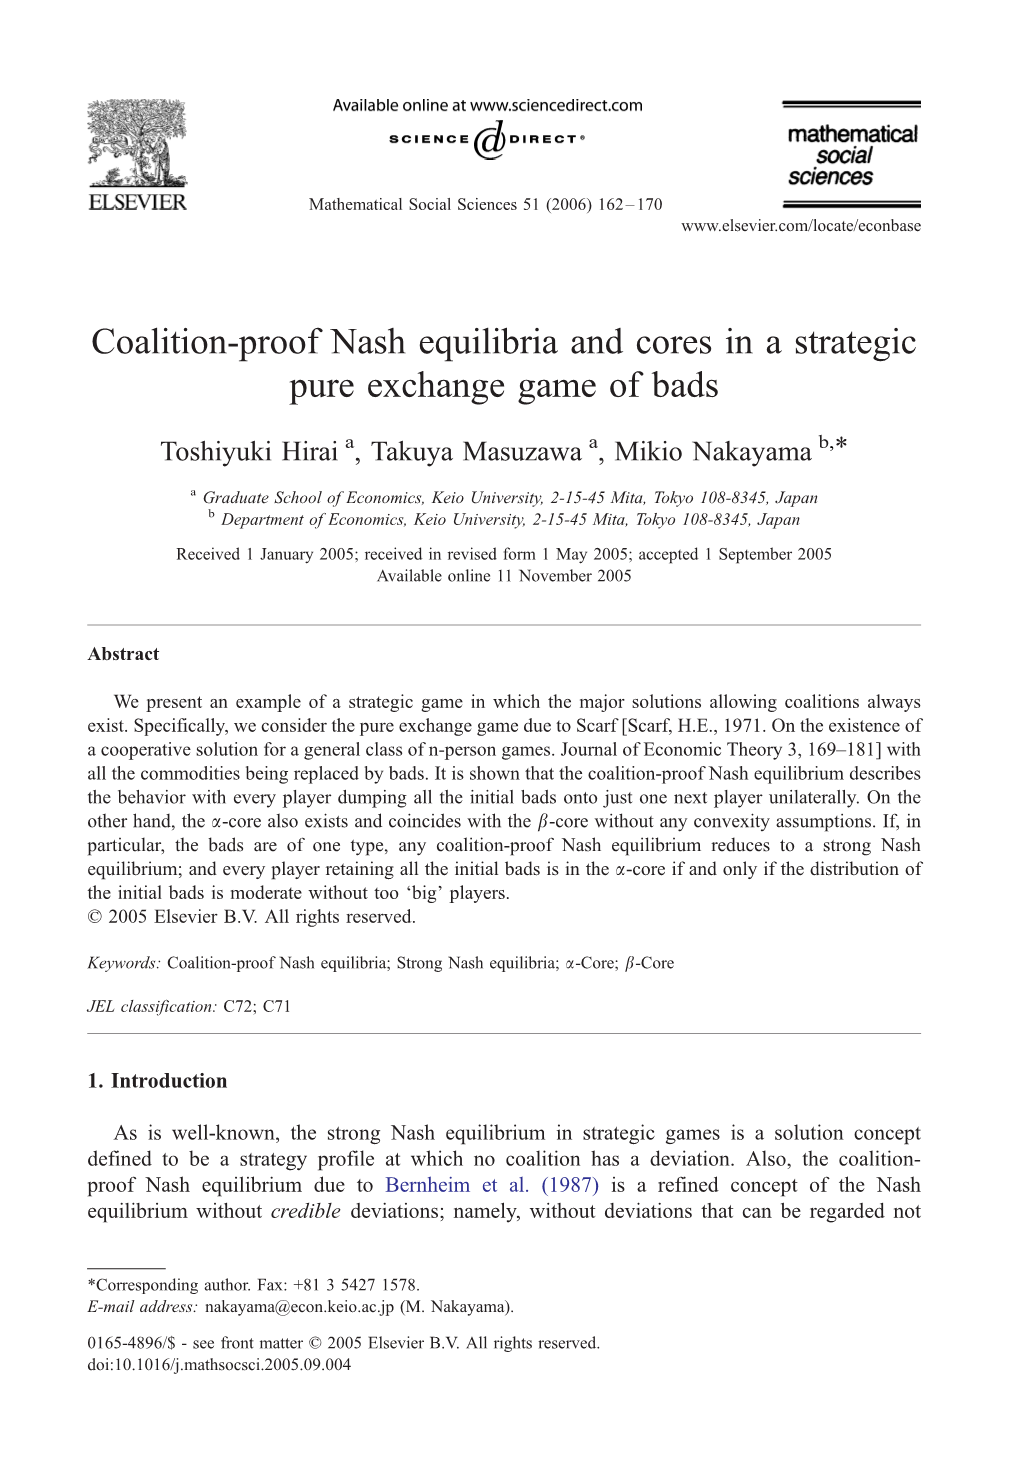 Coalition-Proof Nash Equilibria and Cores in a Strategic Pure Exchange Game of Bads